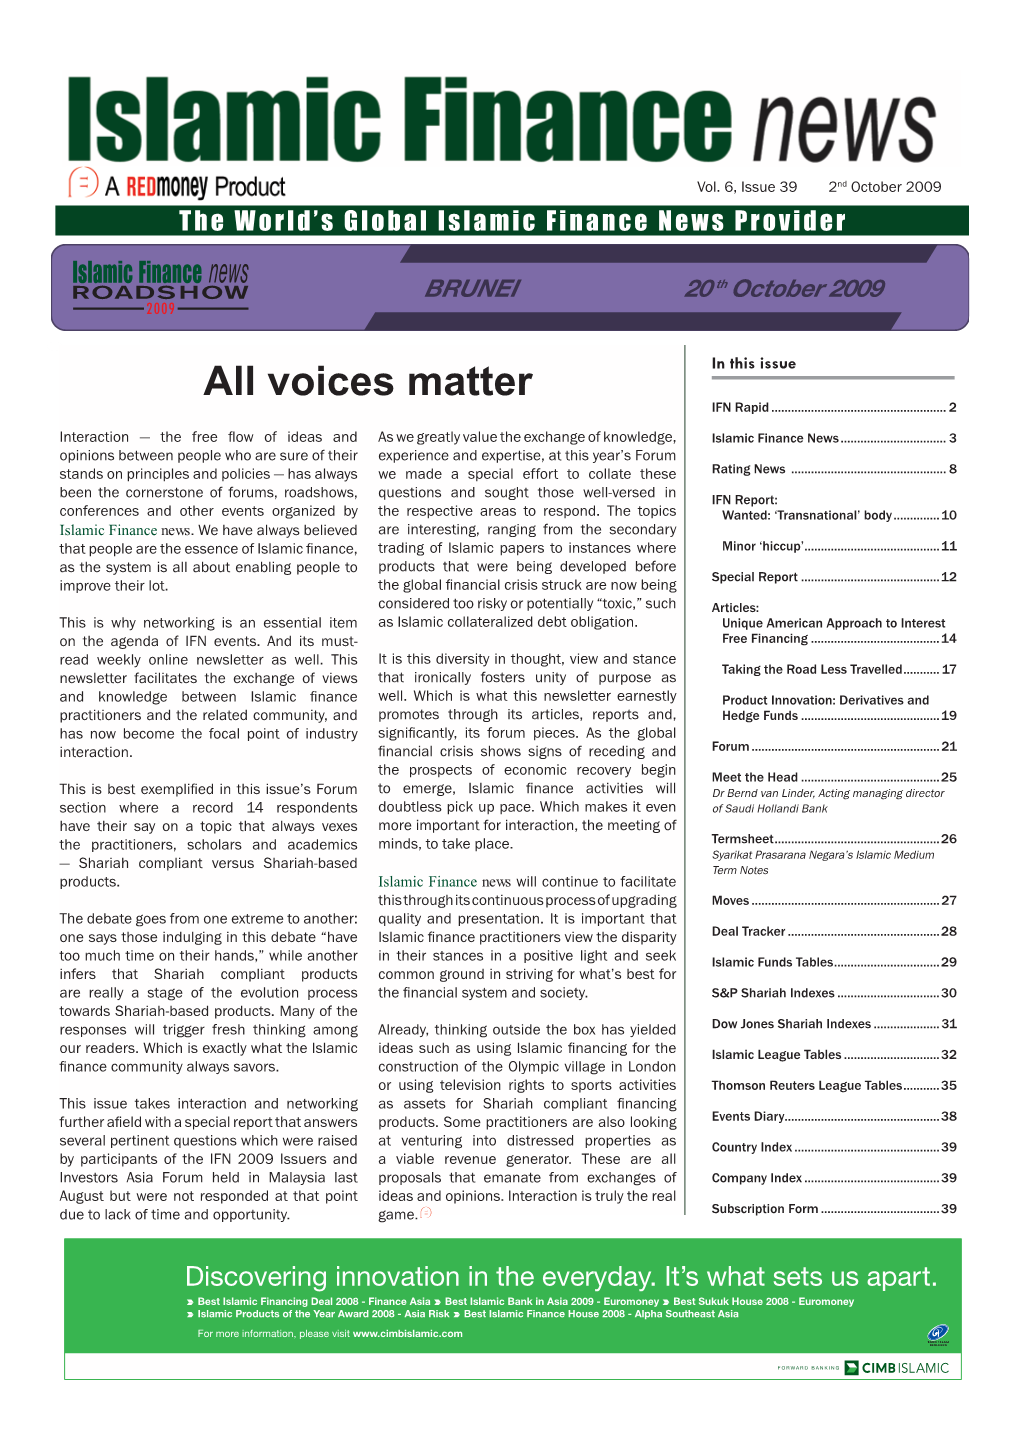 Voices Matter in This Issue IFN Rapid